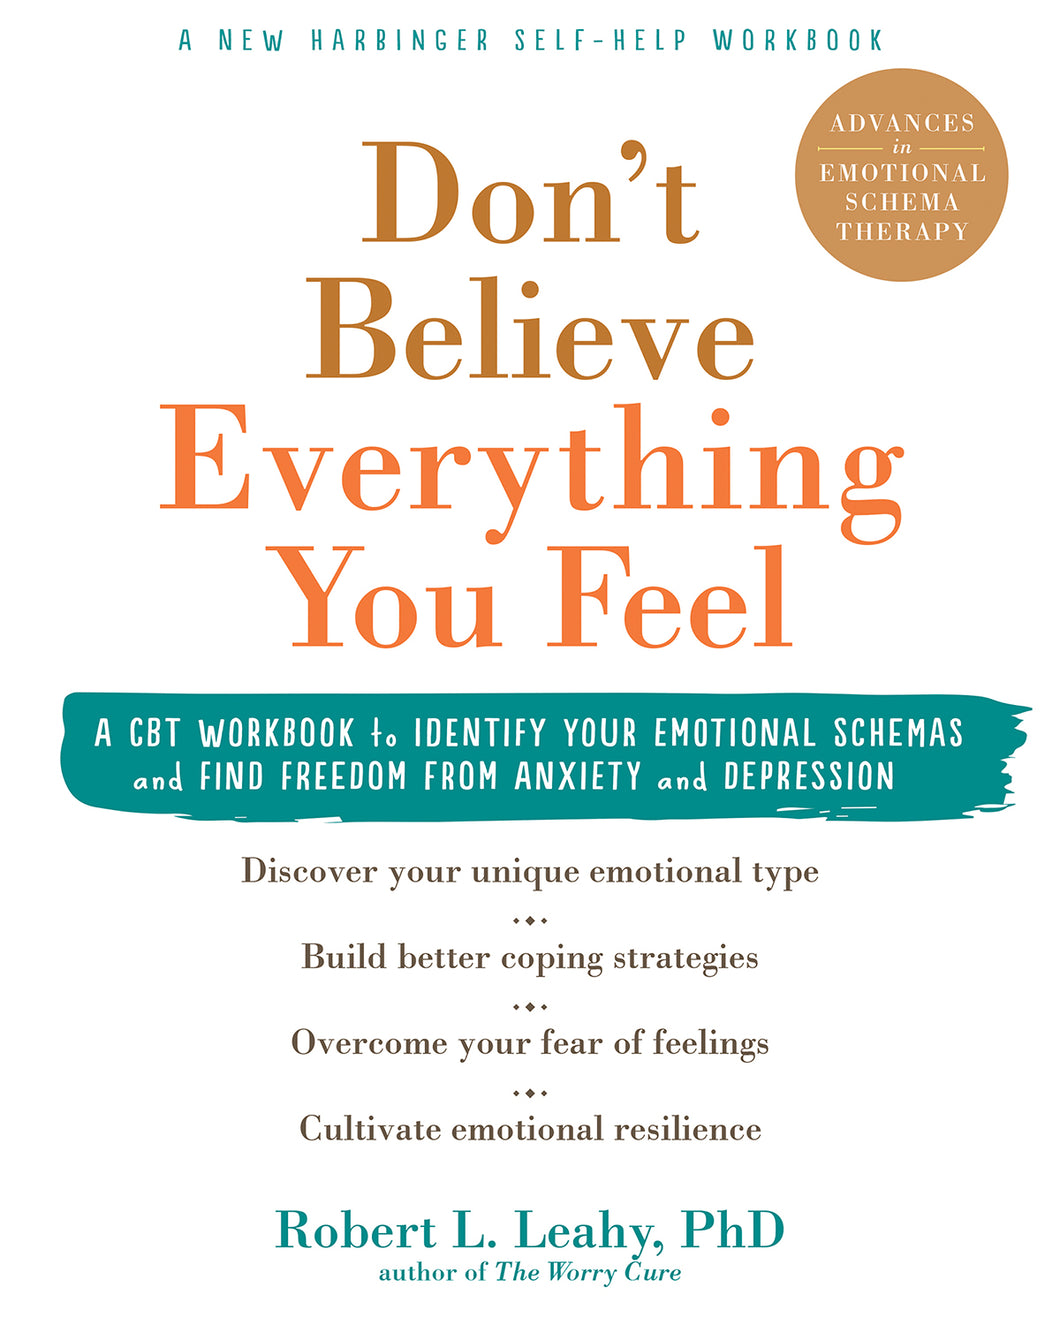 Don't Believe Everything You Feel by Robert L. Leahy PhD - INSTANT DOWNLOAD